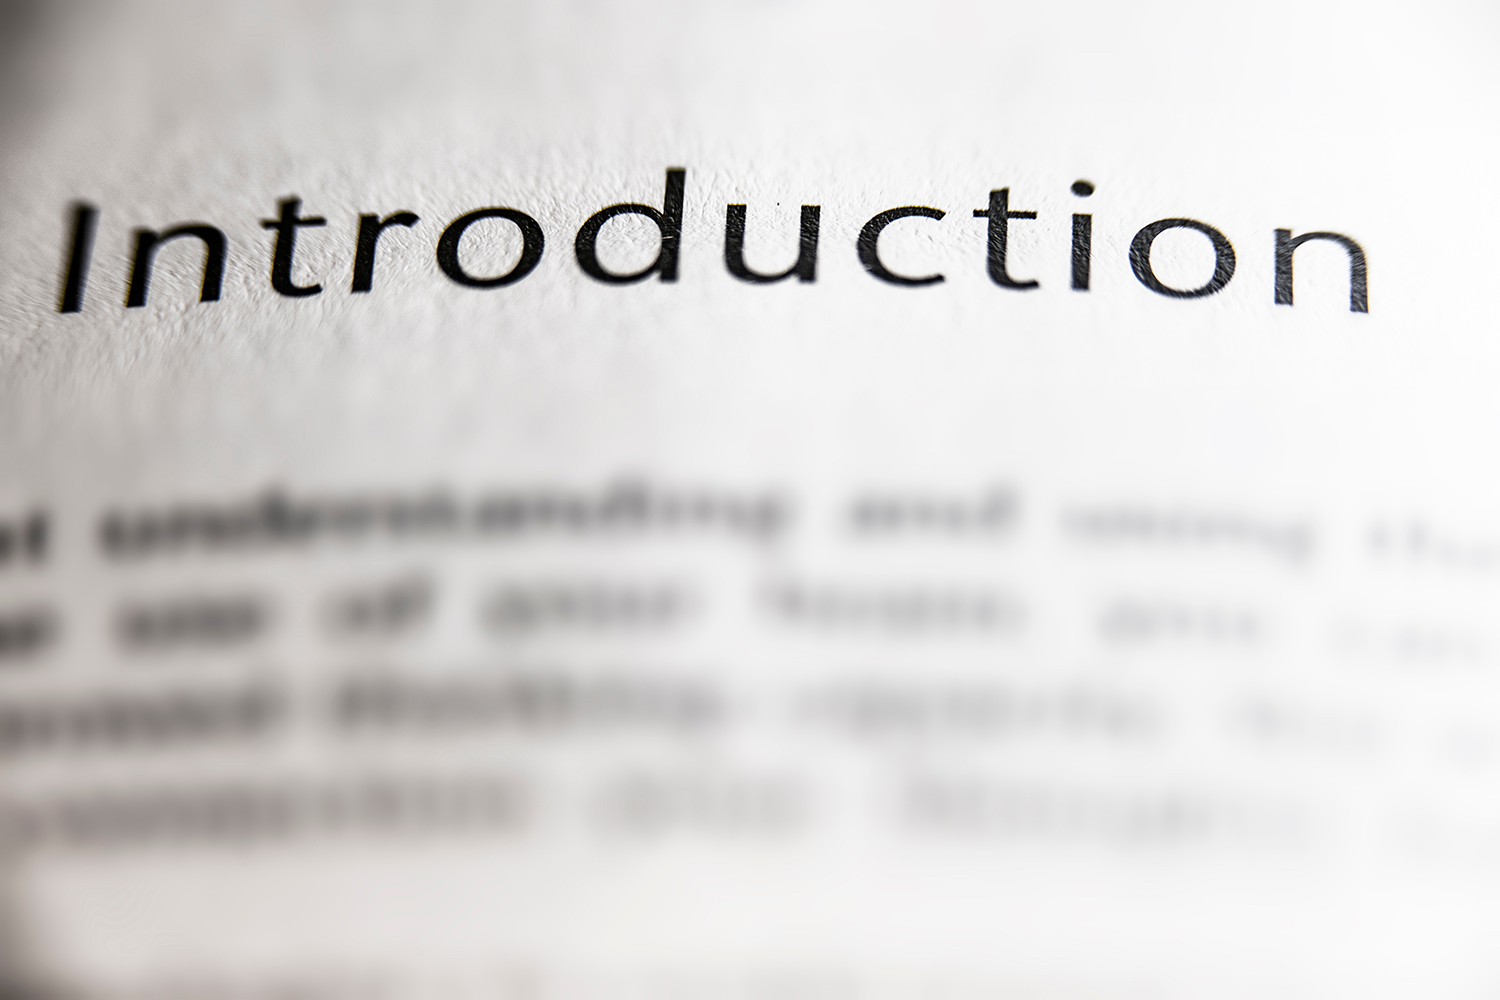 A paper that highlights the phrase "Introduction"